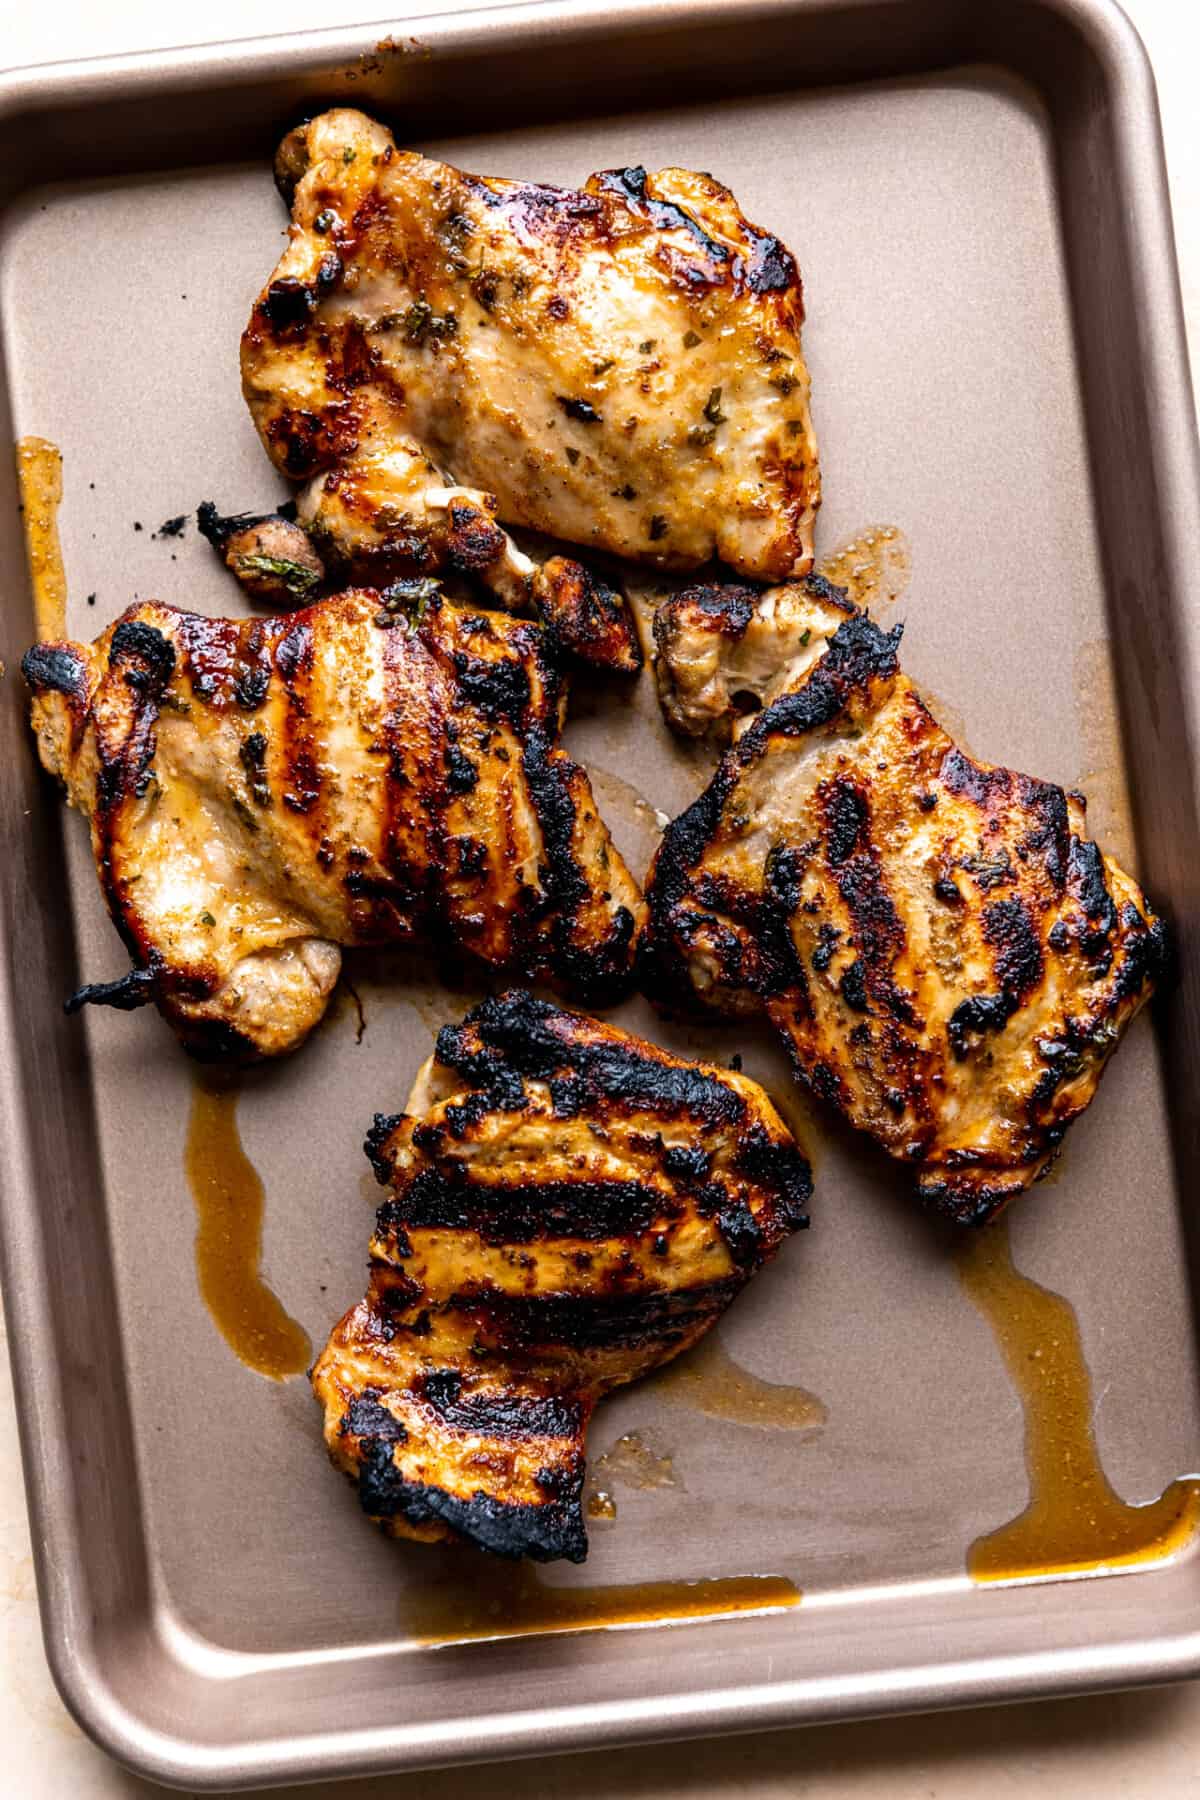 Cooked chicken on baking sheet after cooking.